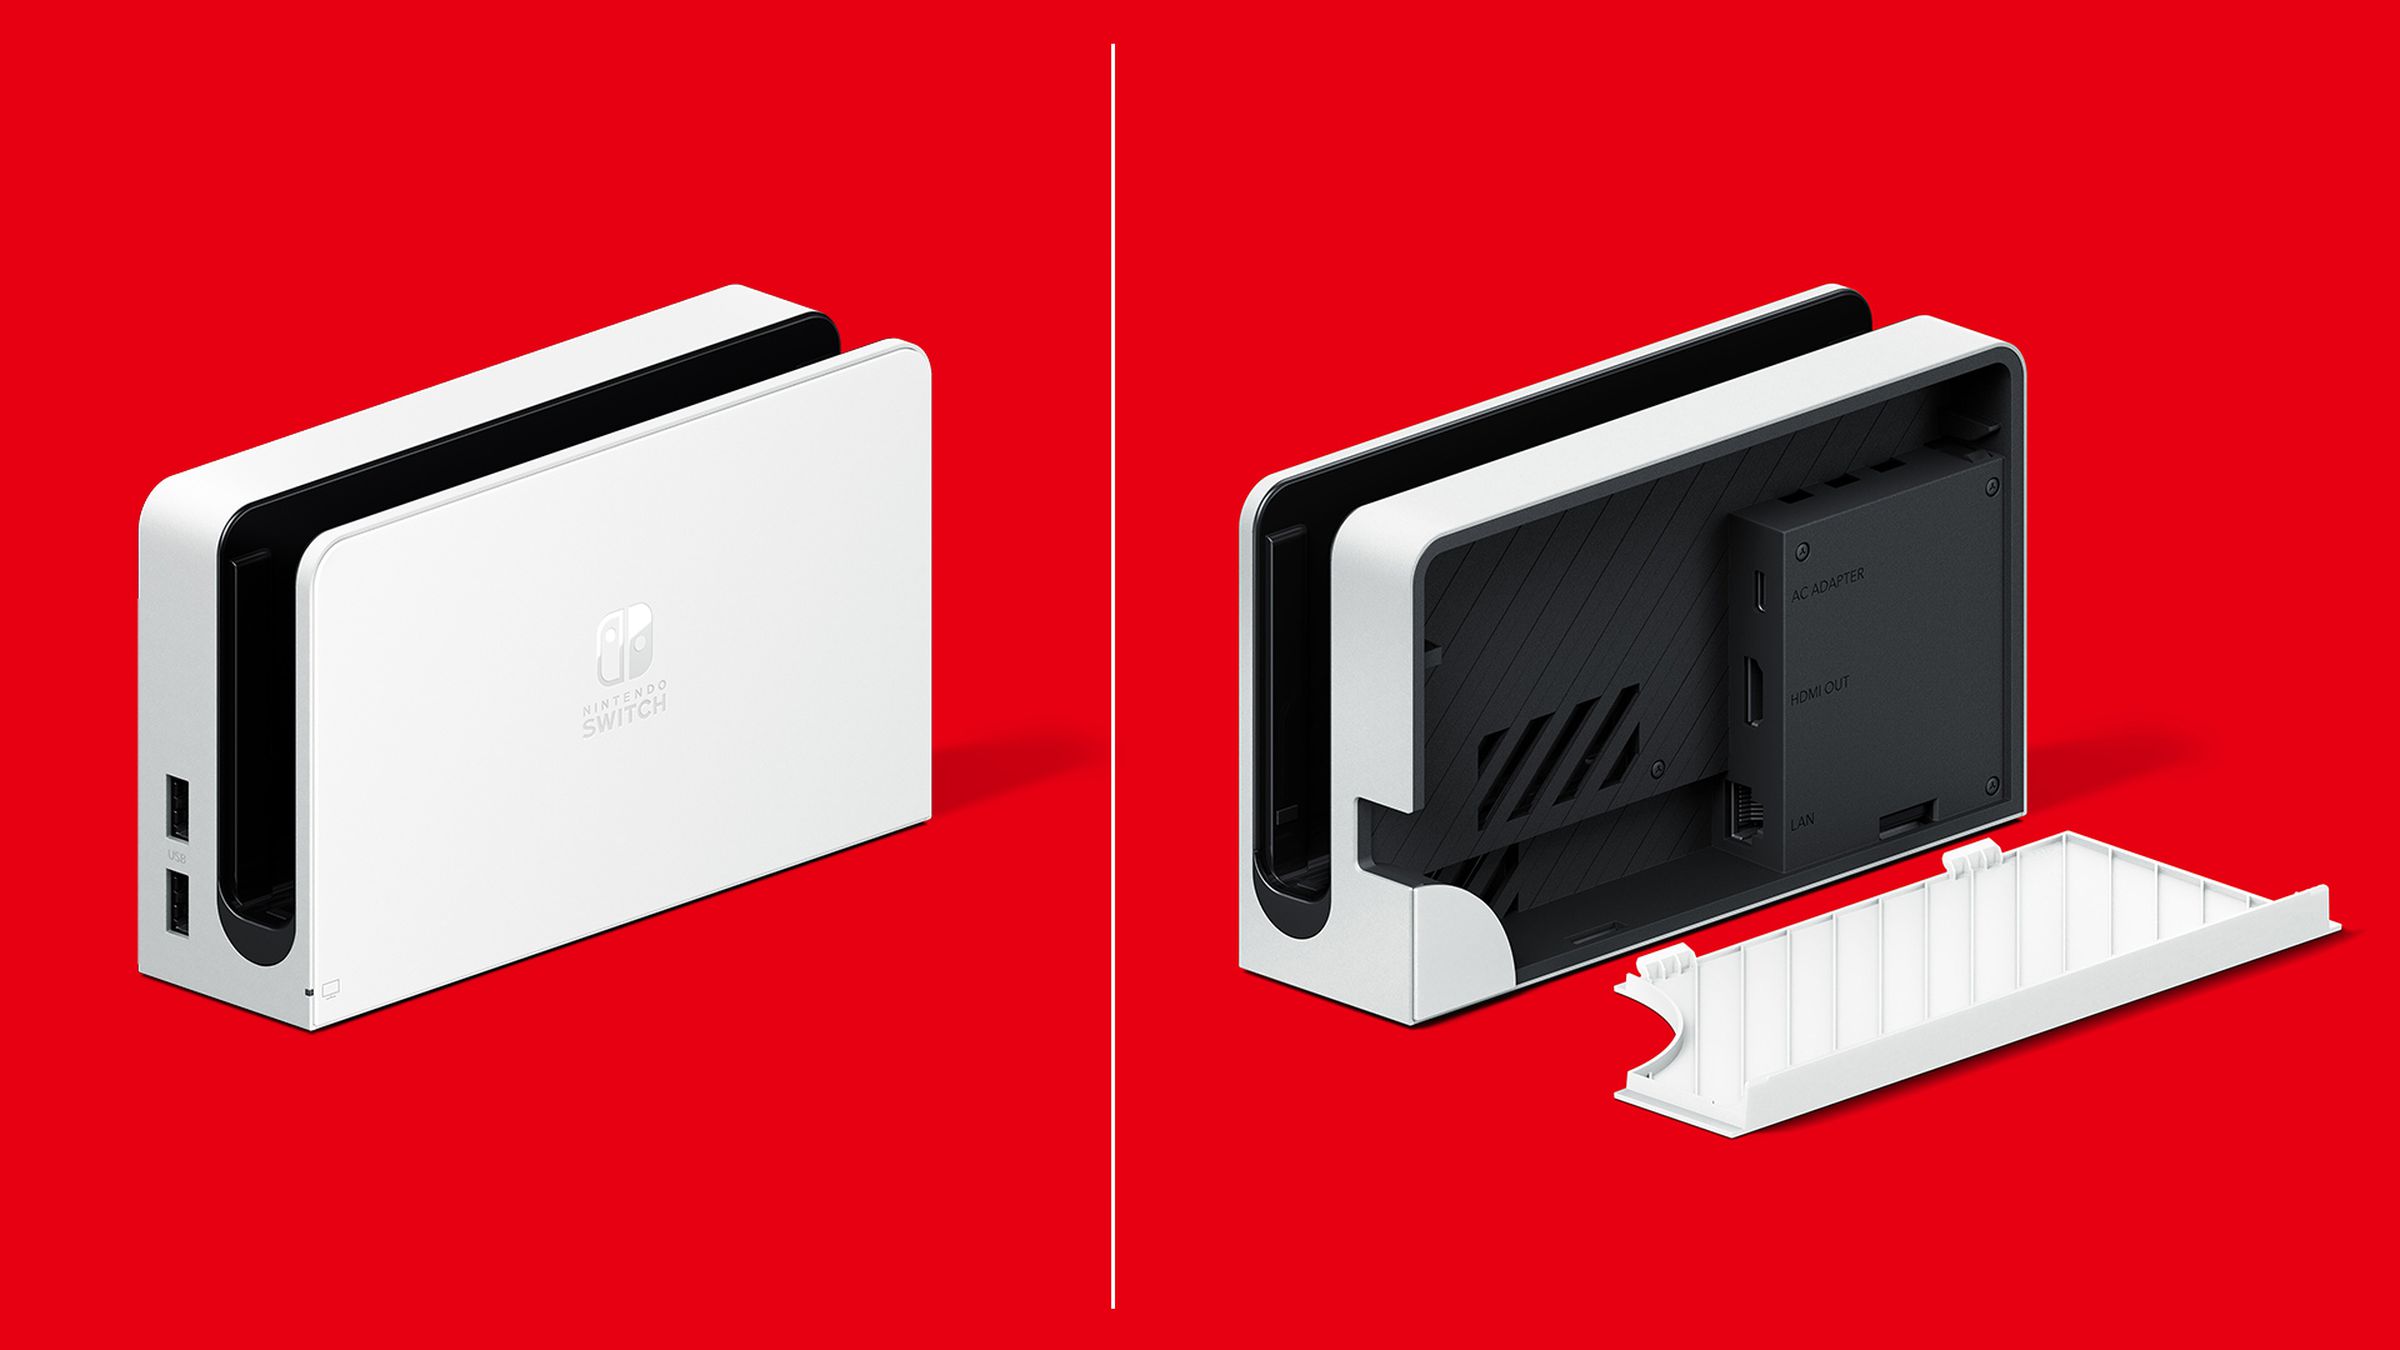 The new Switch dock.